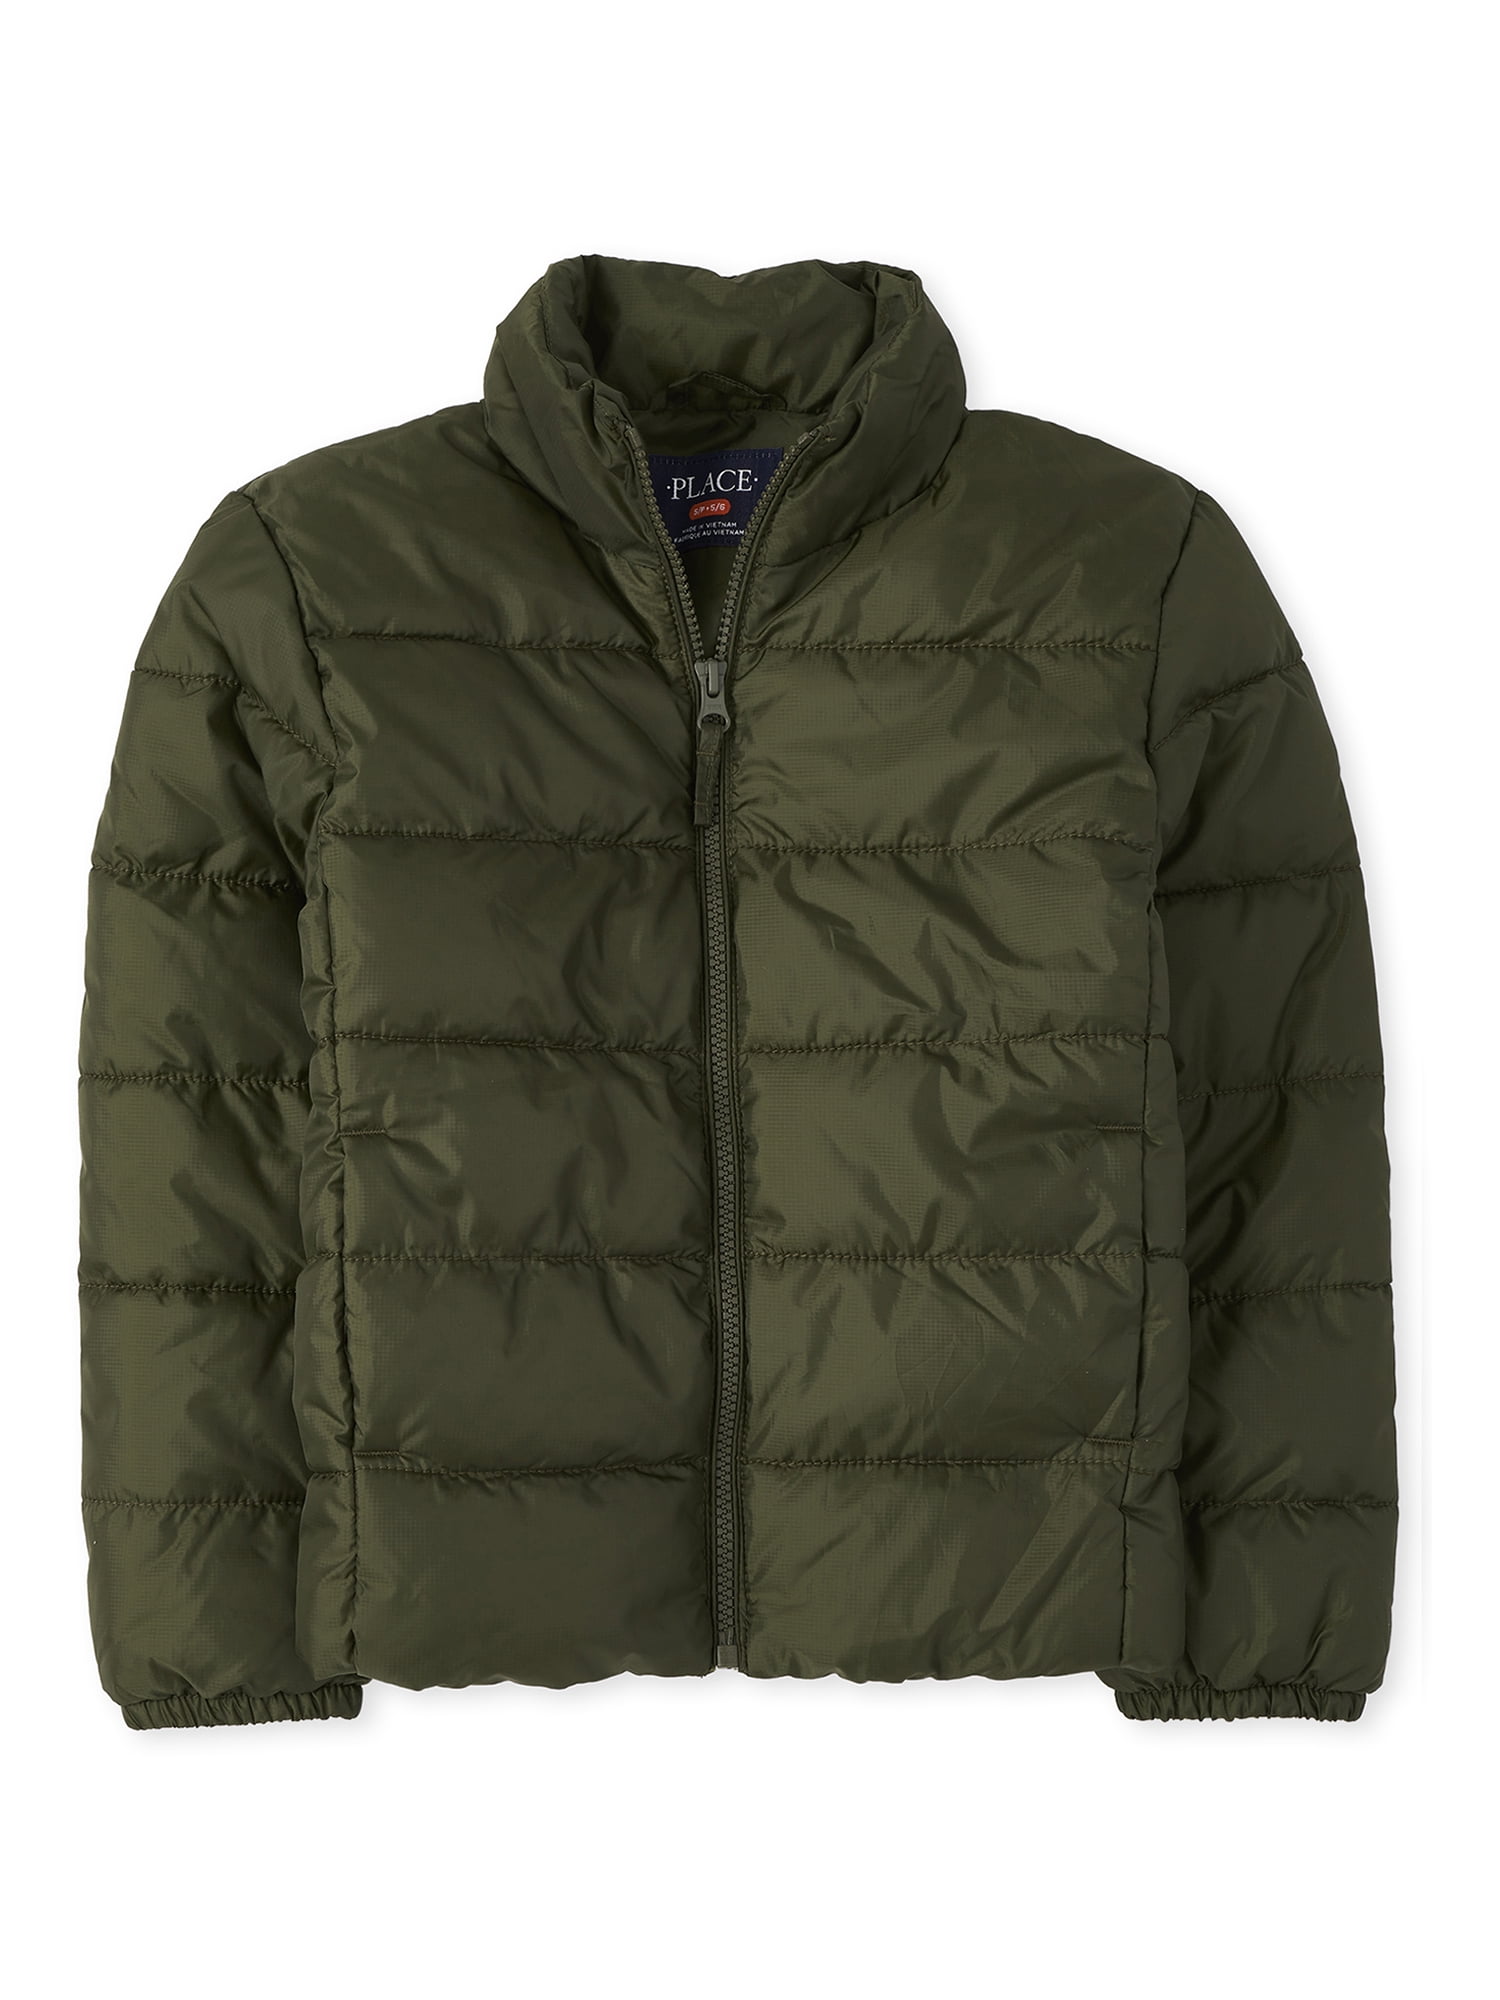 The Childrens Place Boys Puffer Jacket 